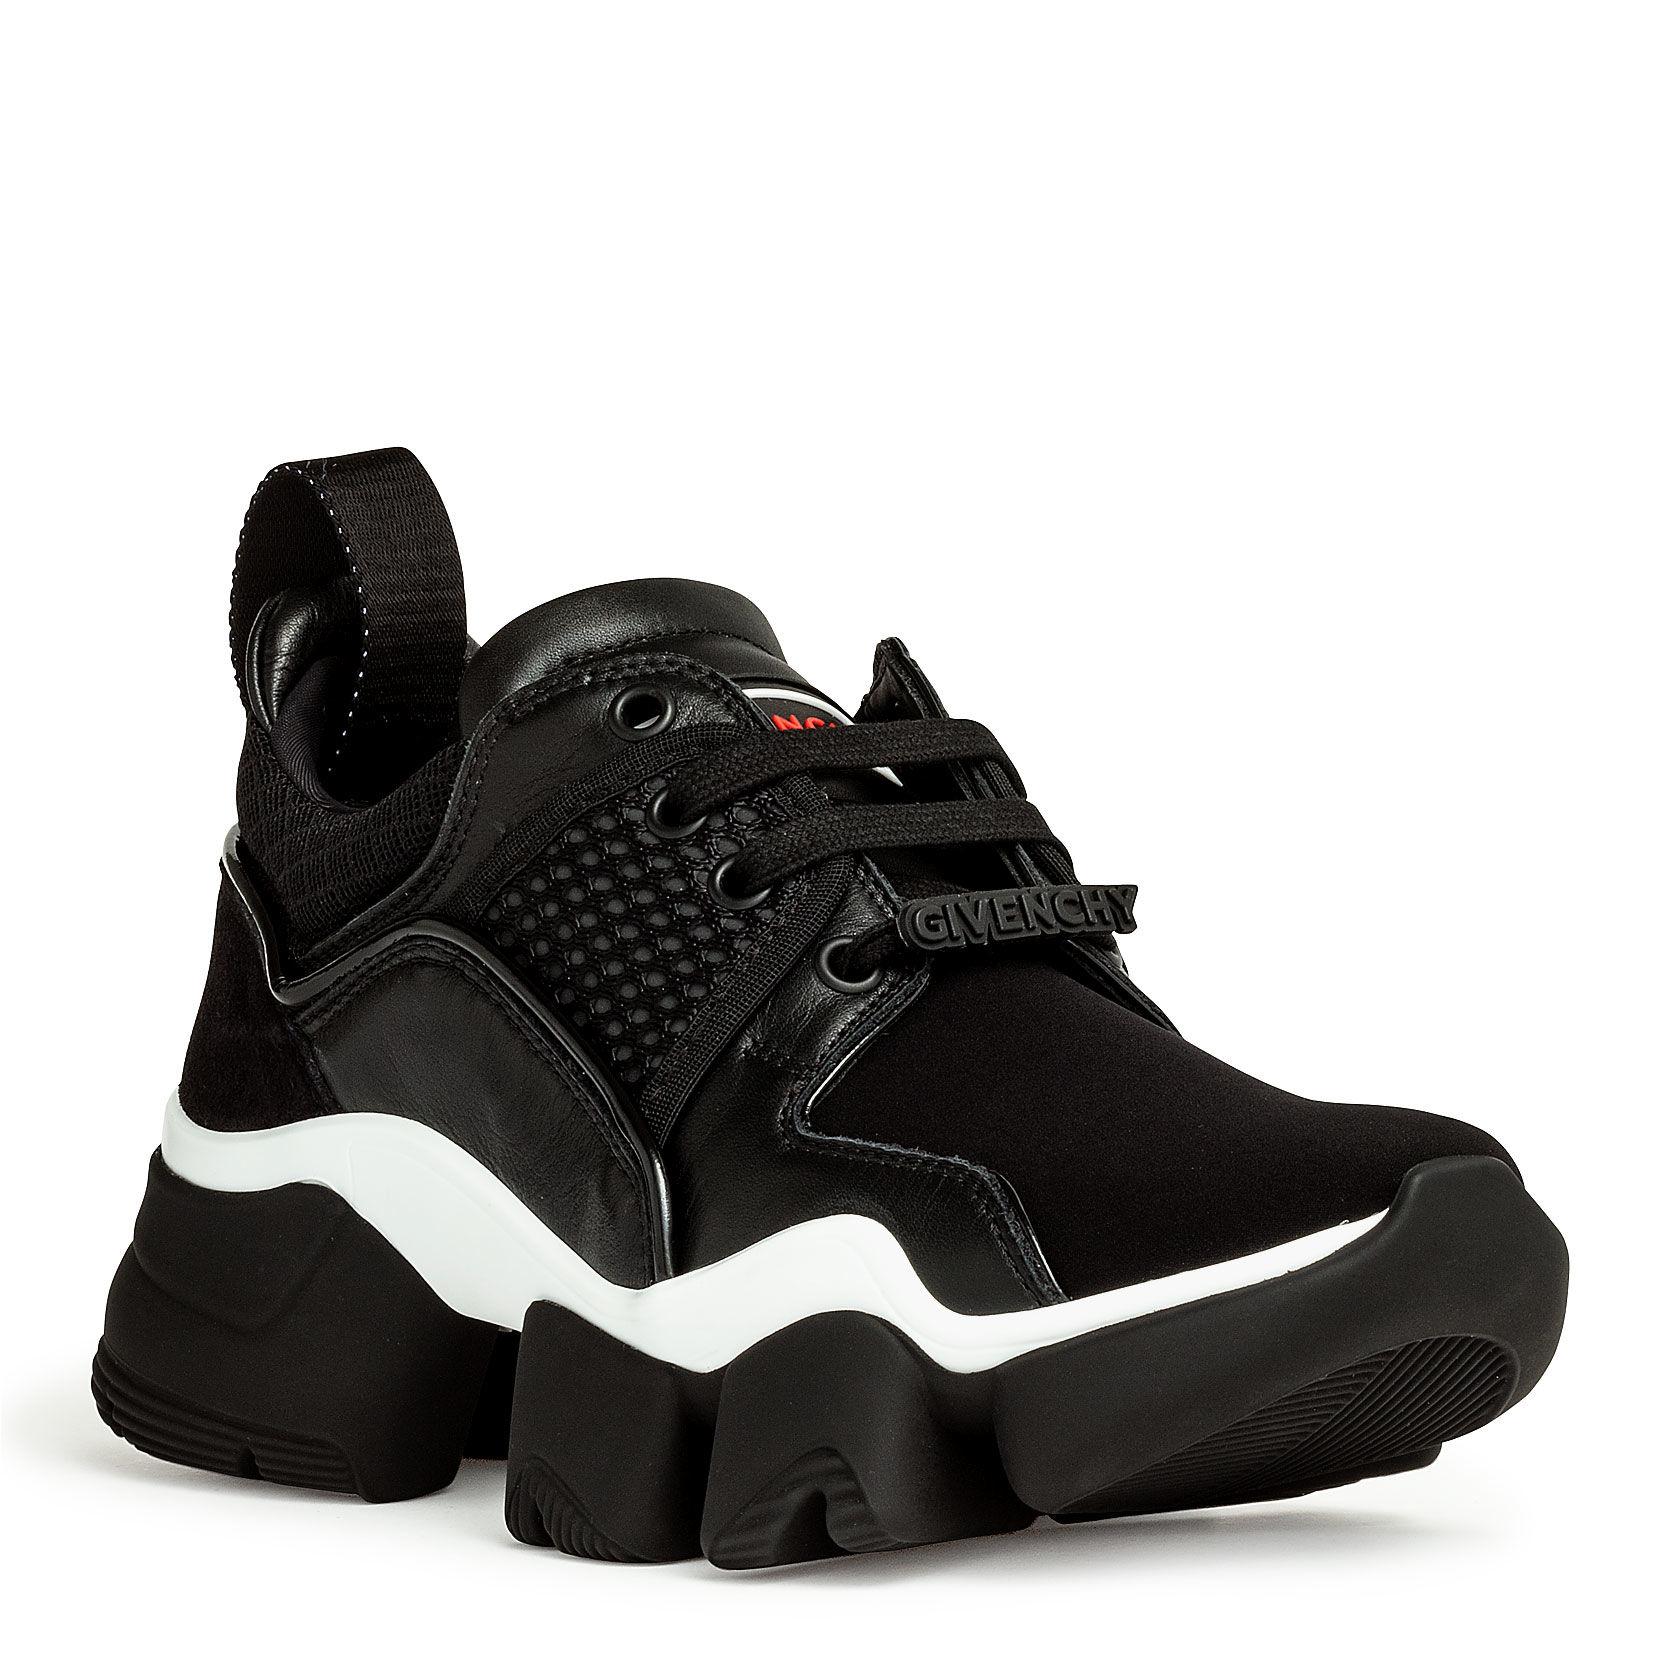 Givenchy Jaw Black And White Low Sneakers in Black - Save 35% - Lyst